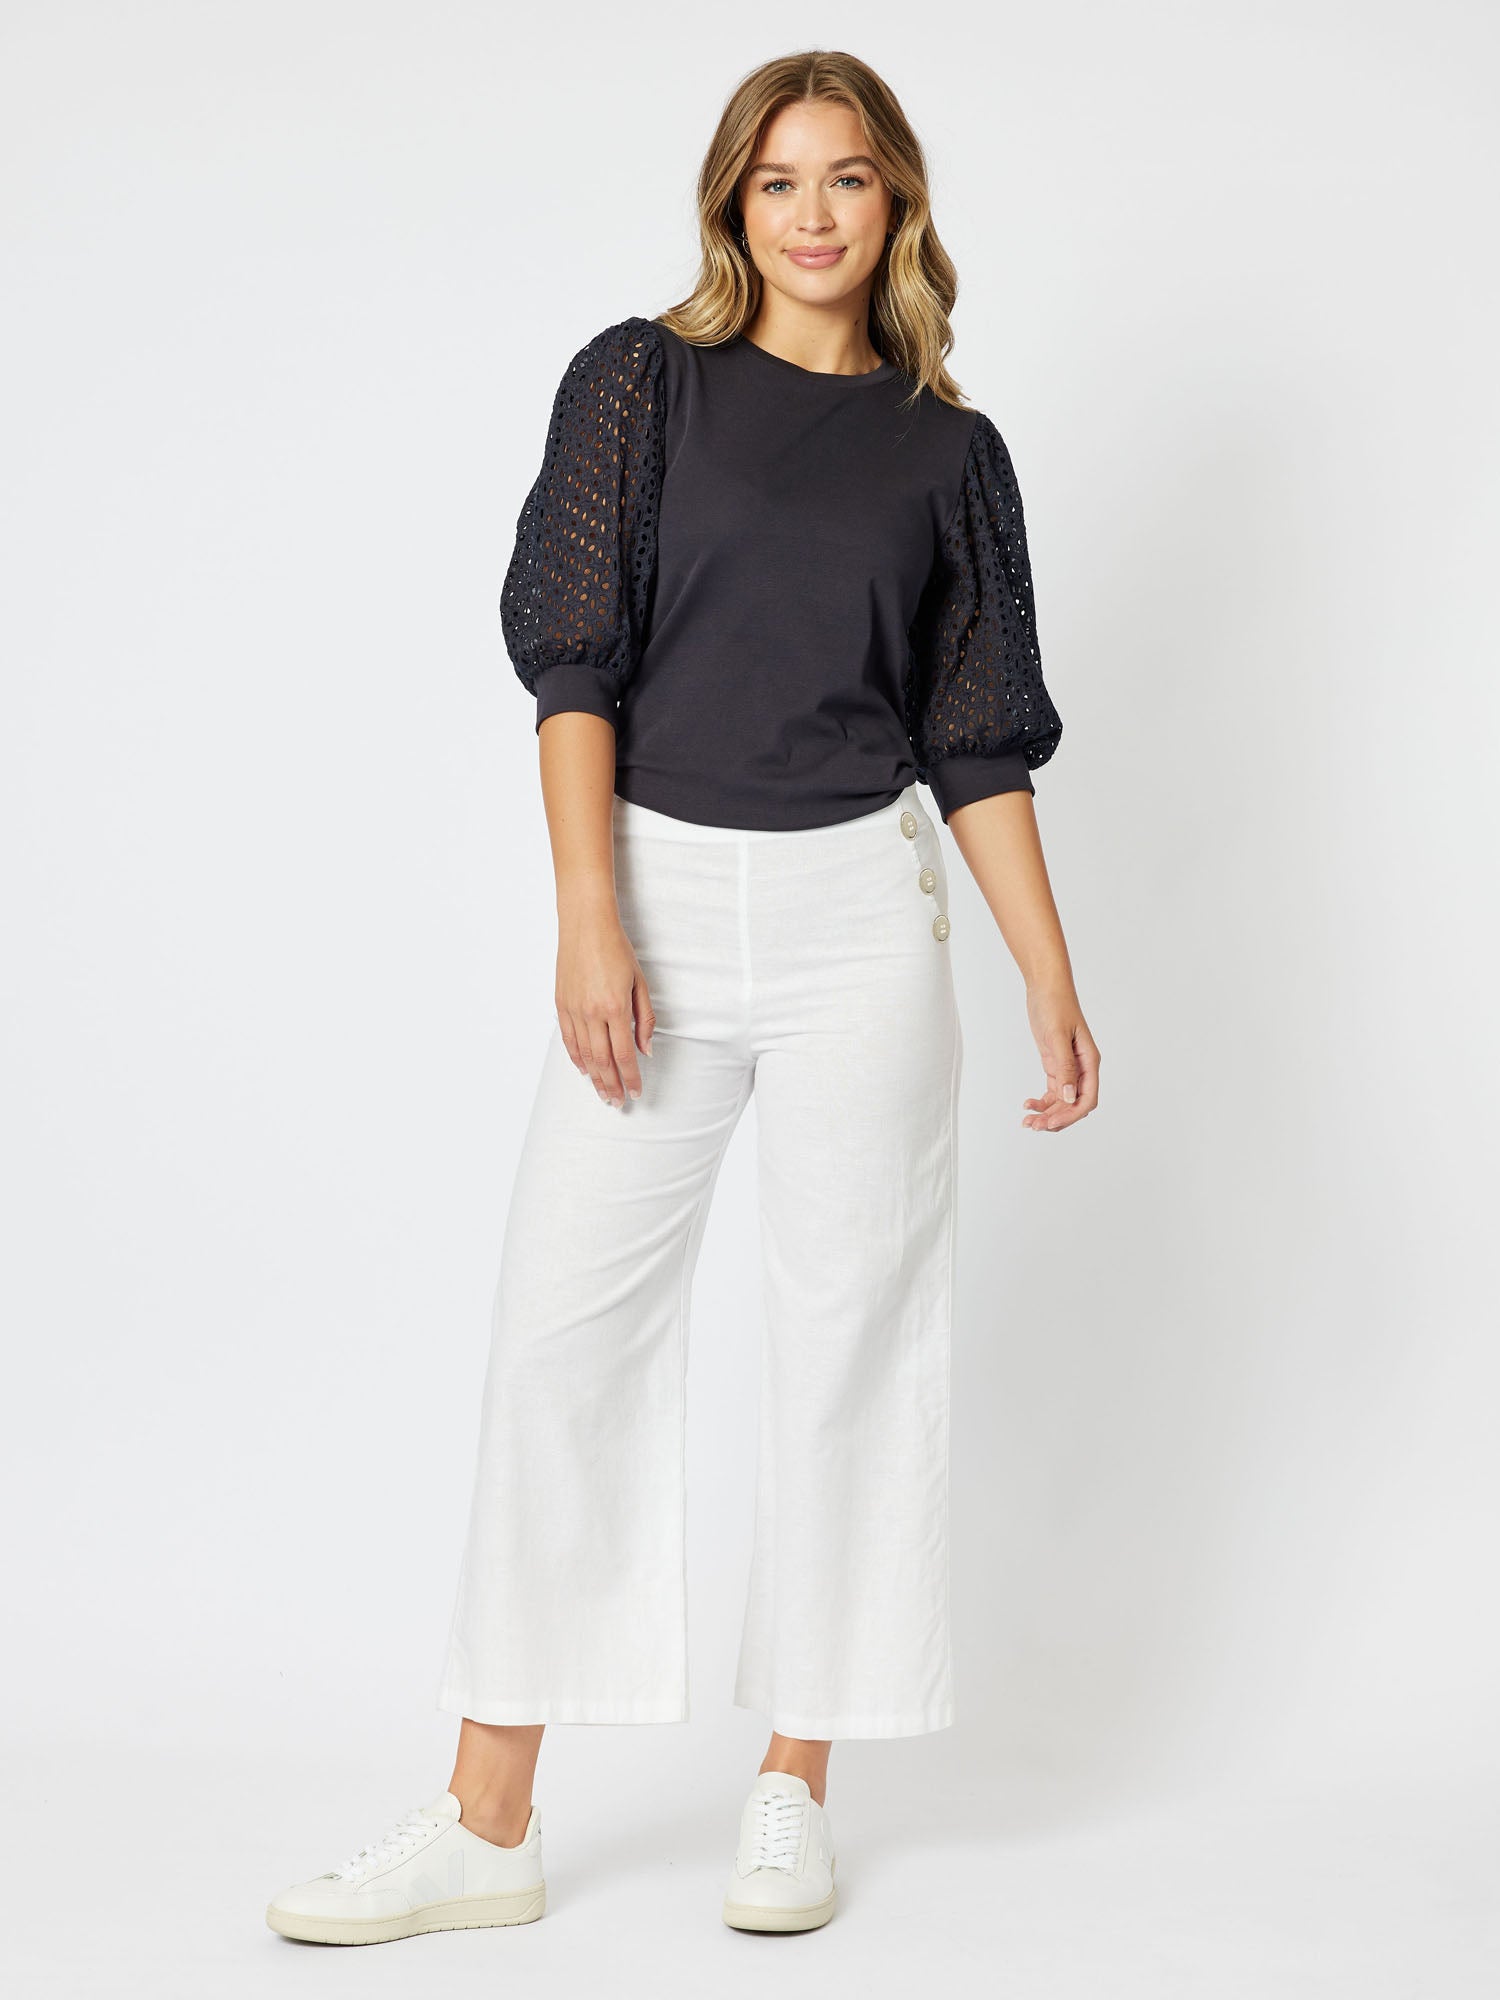 Wide Leg Pull On Pant - White